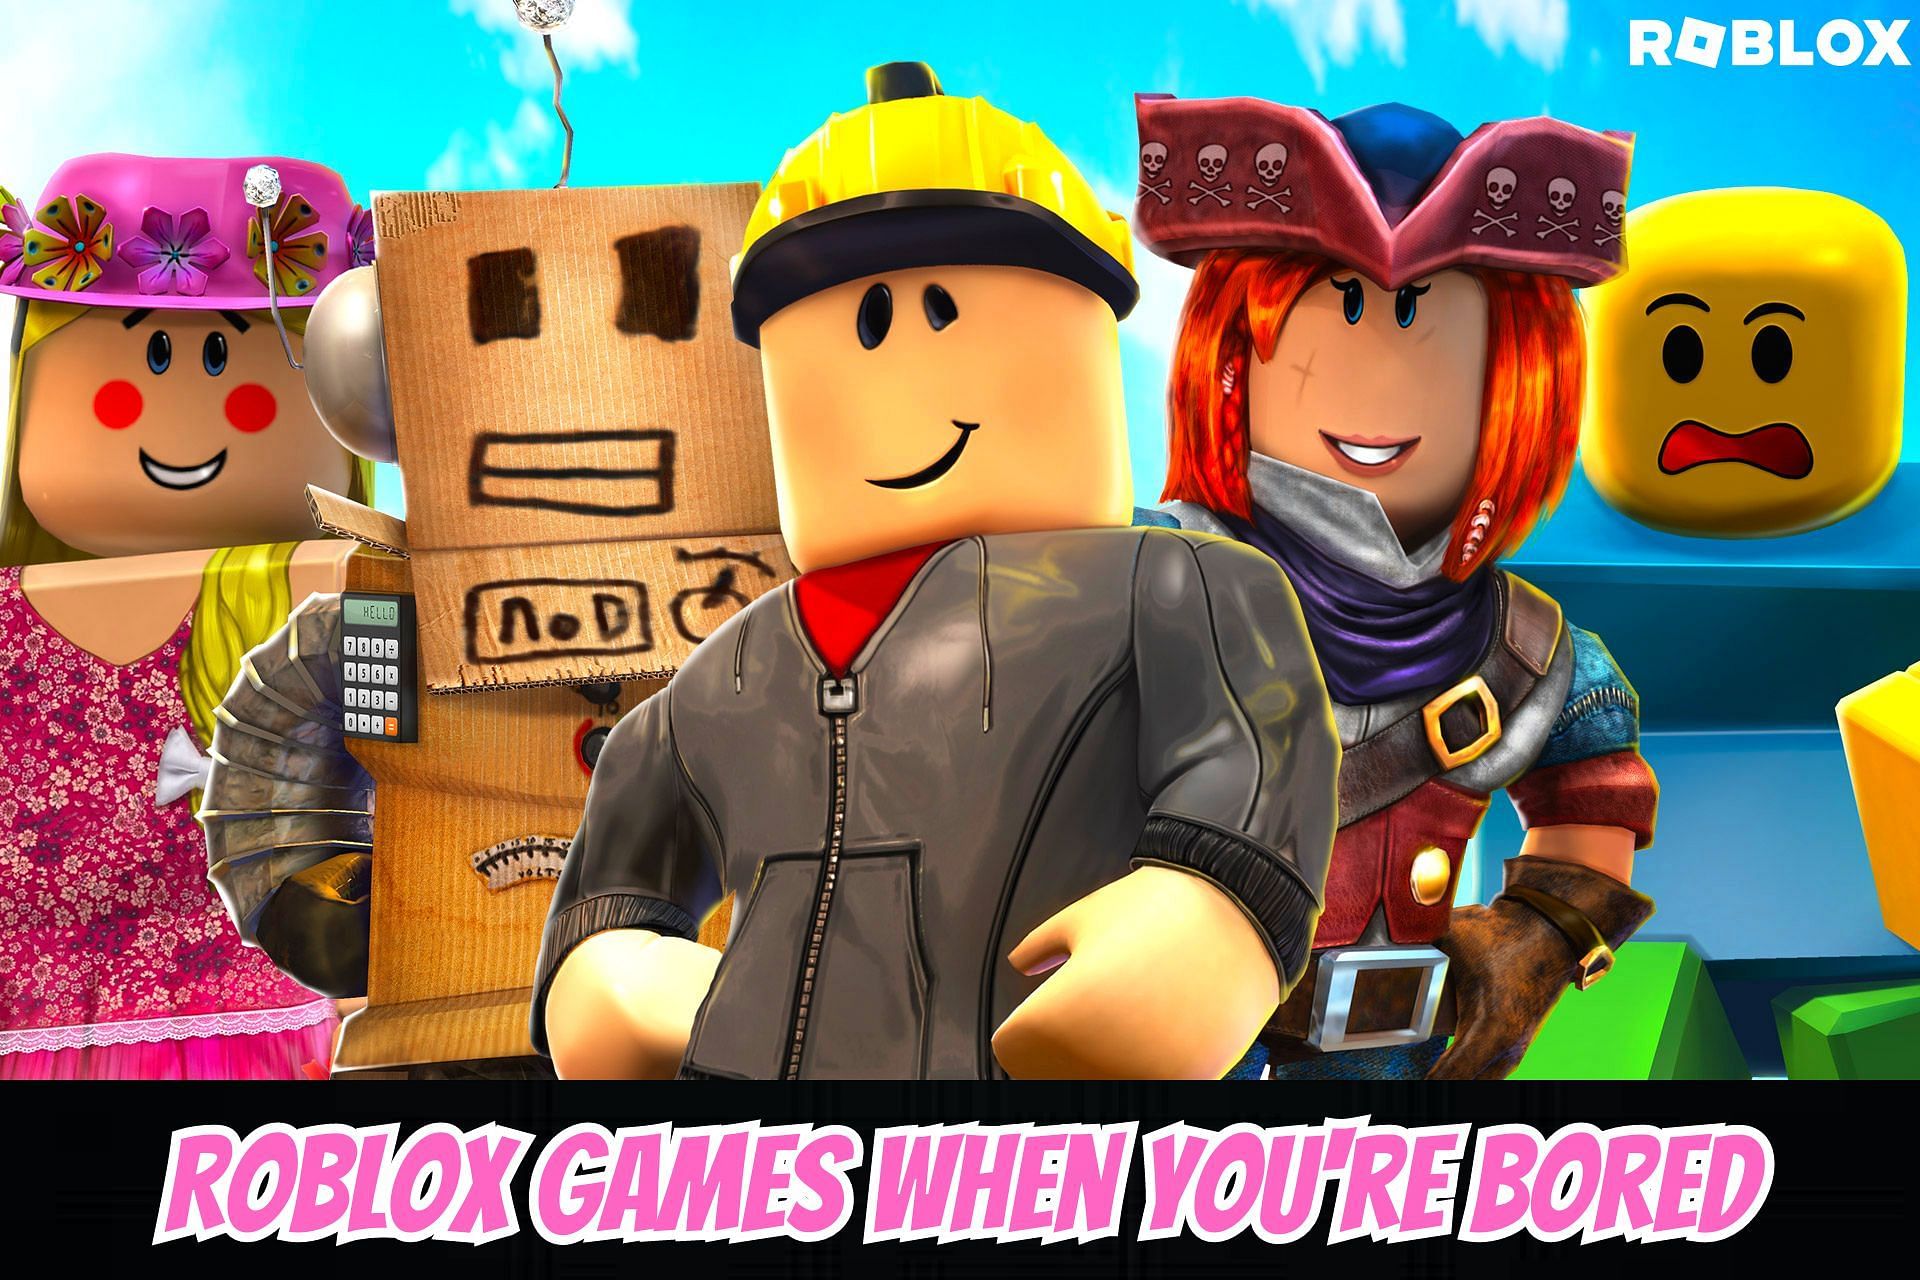 What other roblox games do you know to have fun in when bored